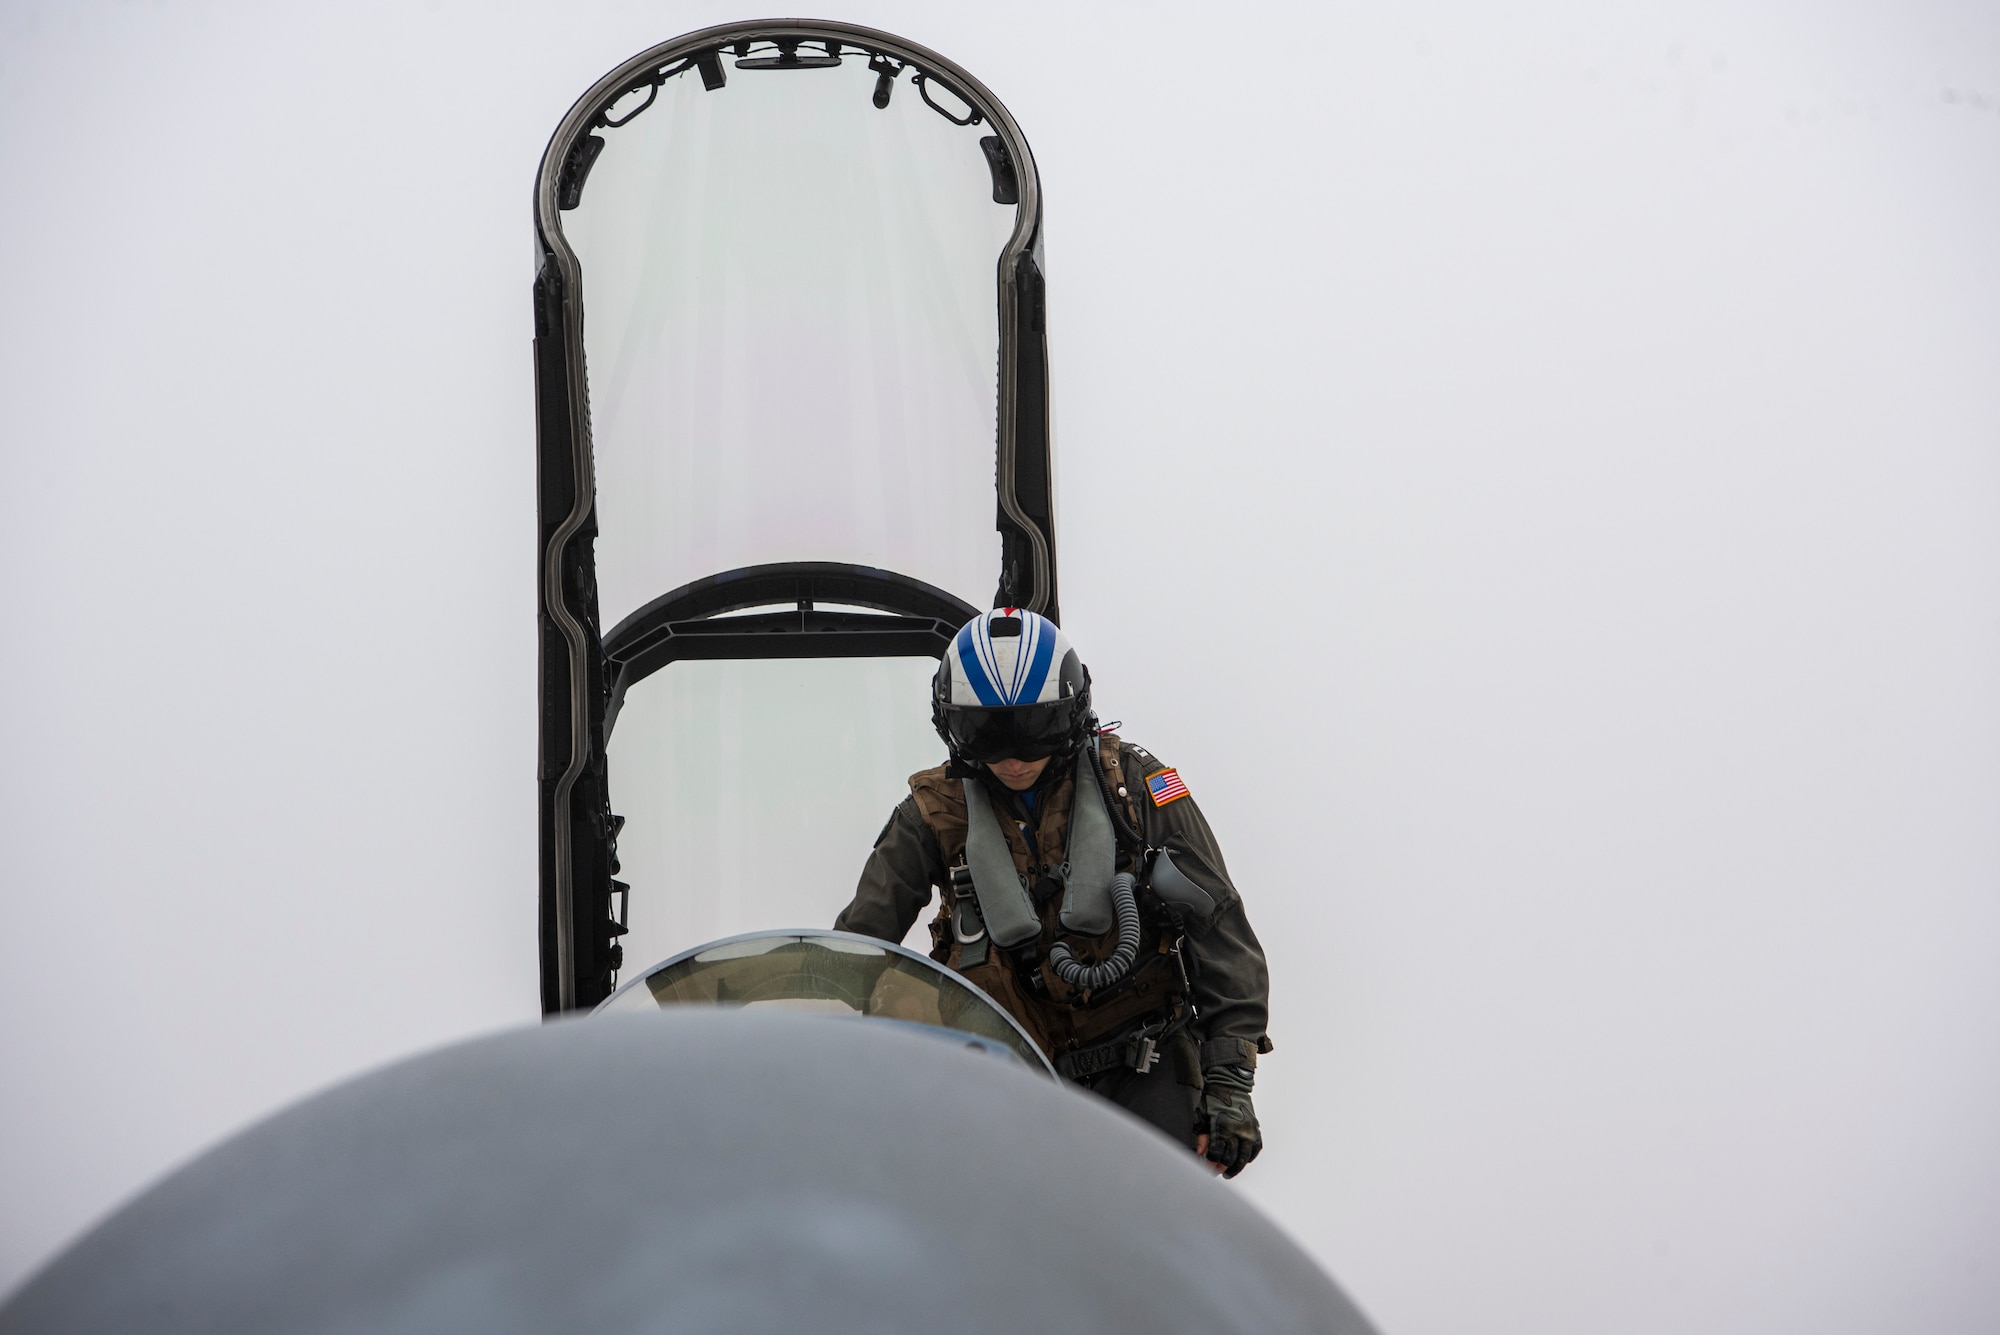 U.S. Navy Lt. Nick Lasalle, pilot assigned to Electronic Attack Squadron 131 at Naval Air Station Whidbey Island, Washington, climbs into an EA-18G Growler during Vigilant Storm 23 at Osan Air Base, Republic of Korea, Nov. 1, 2022.